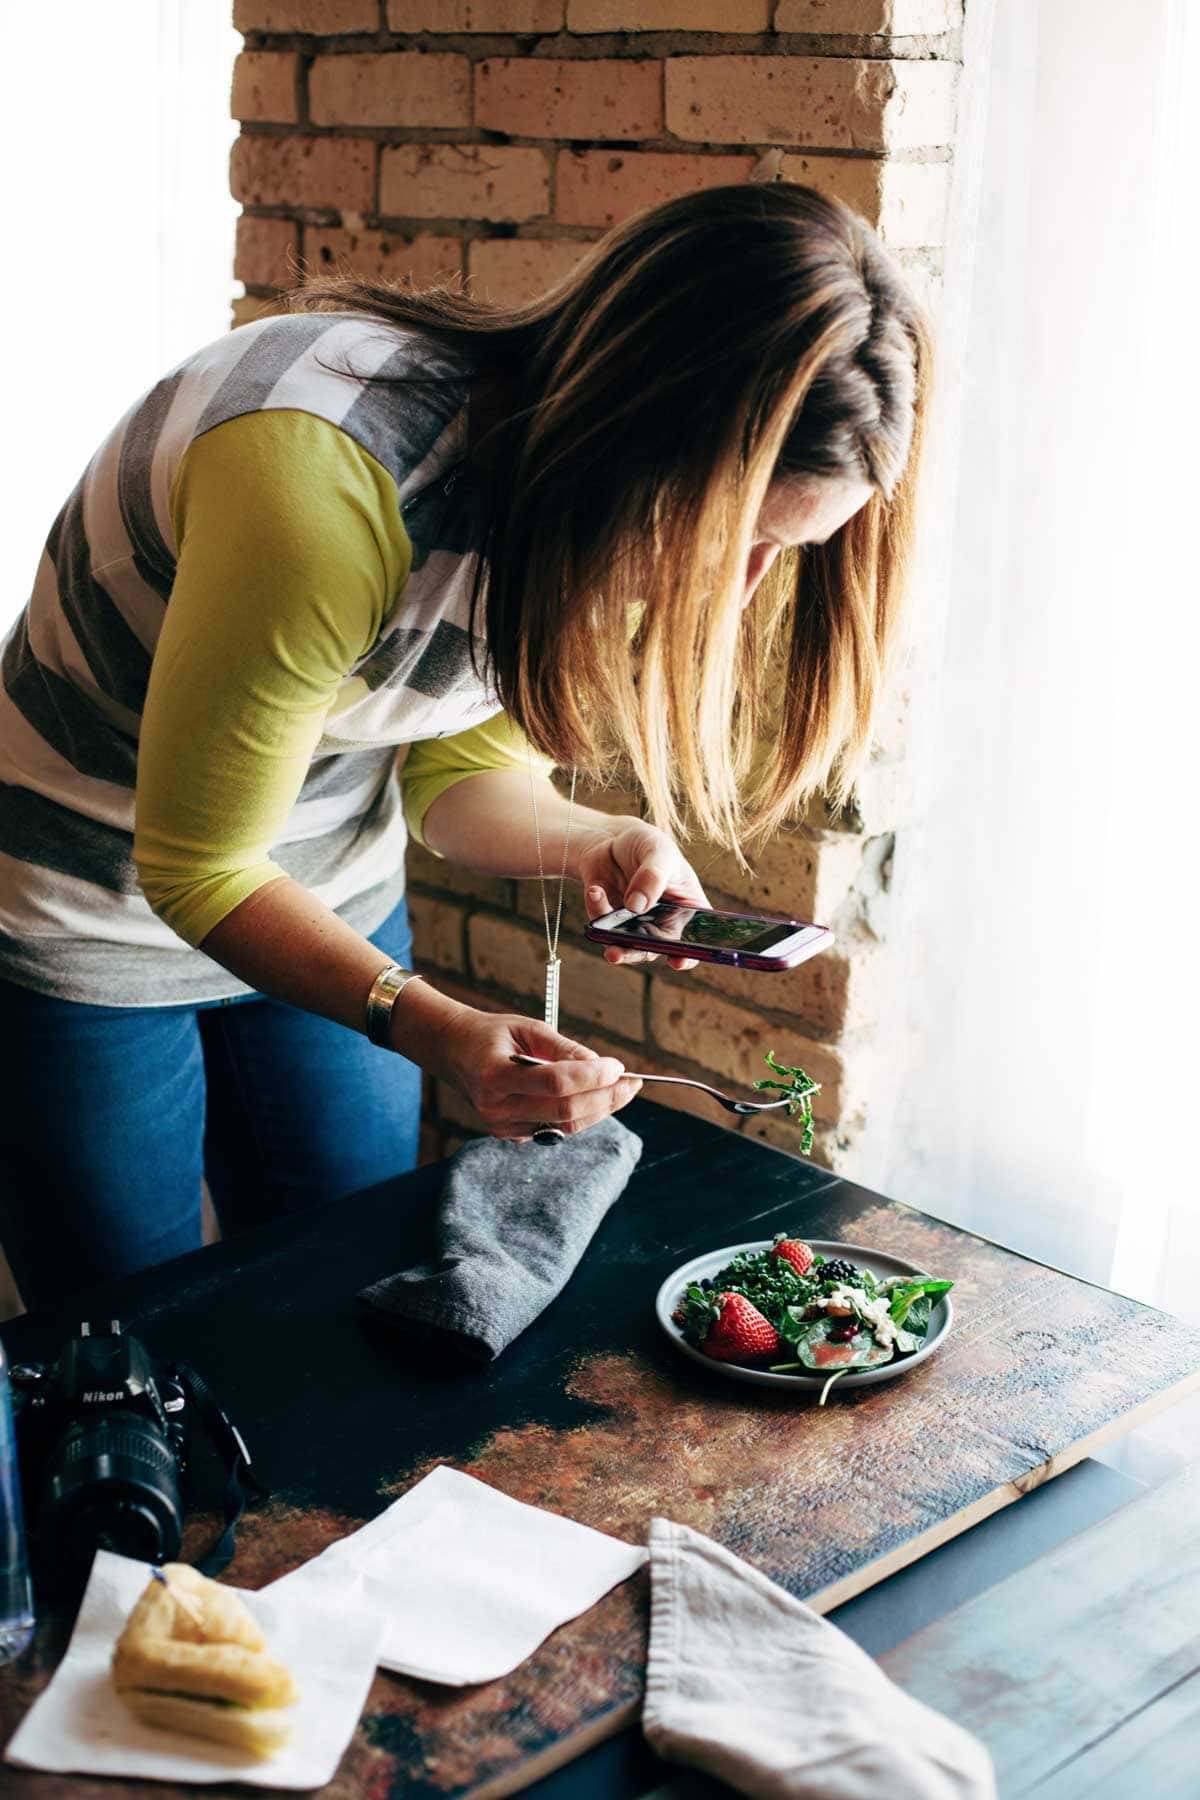 Woman taking a photo of salad with her phone.